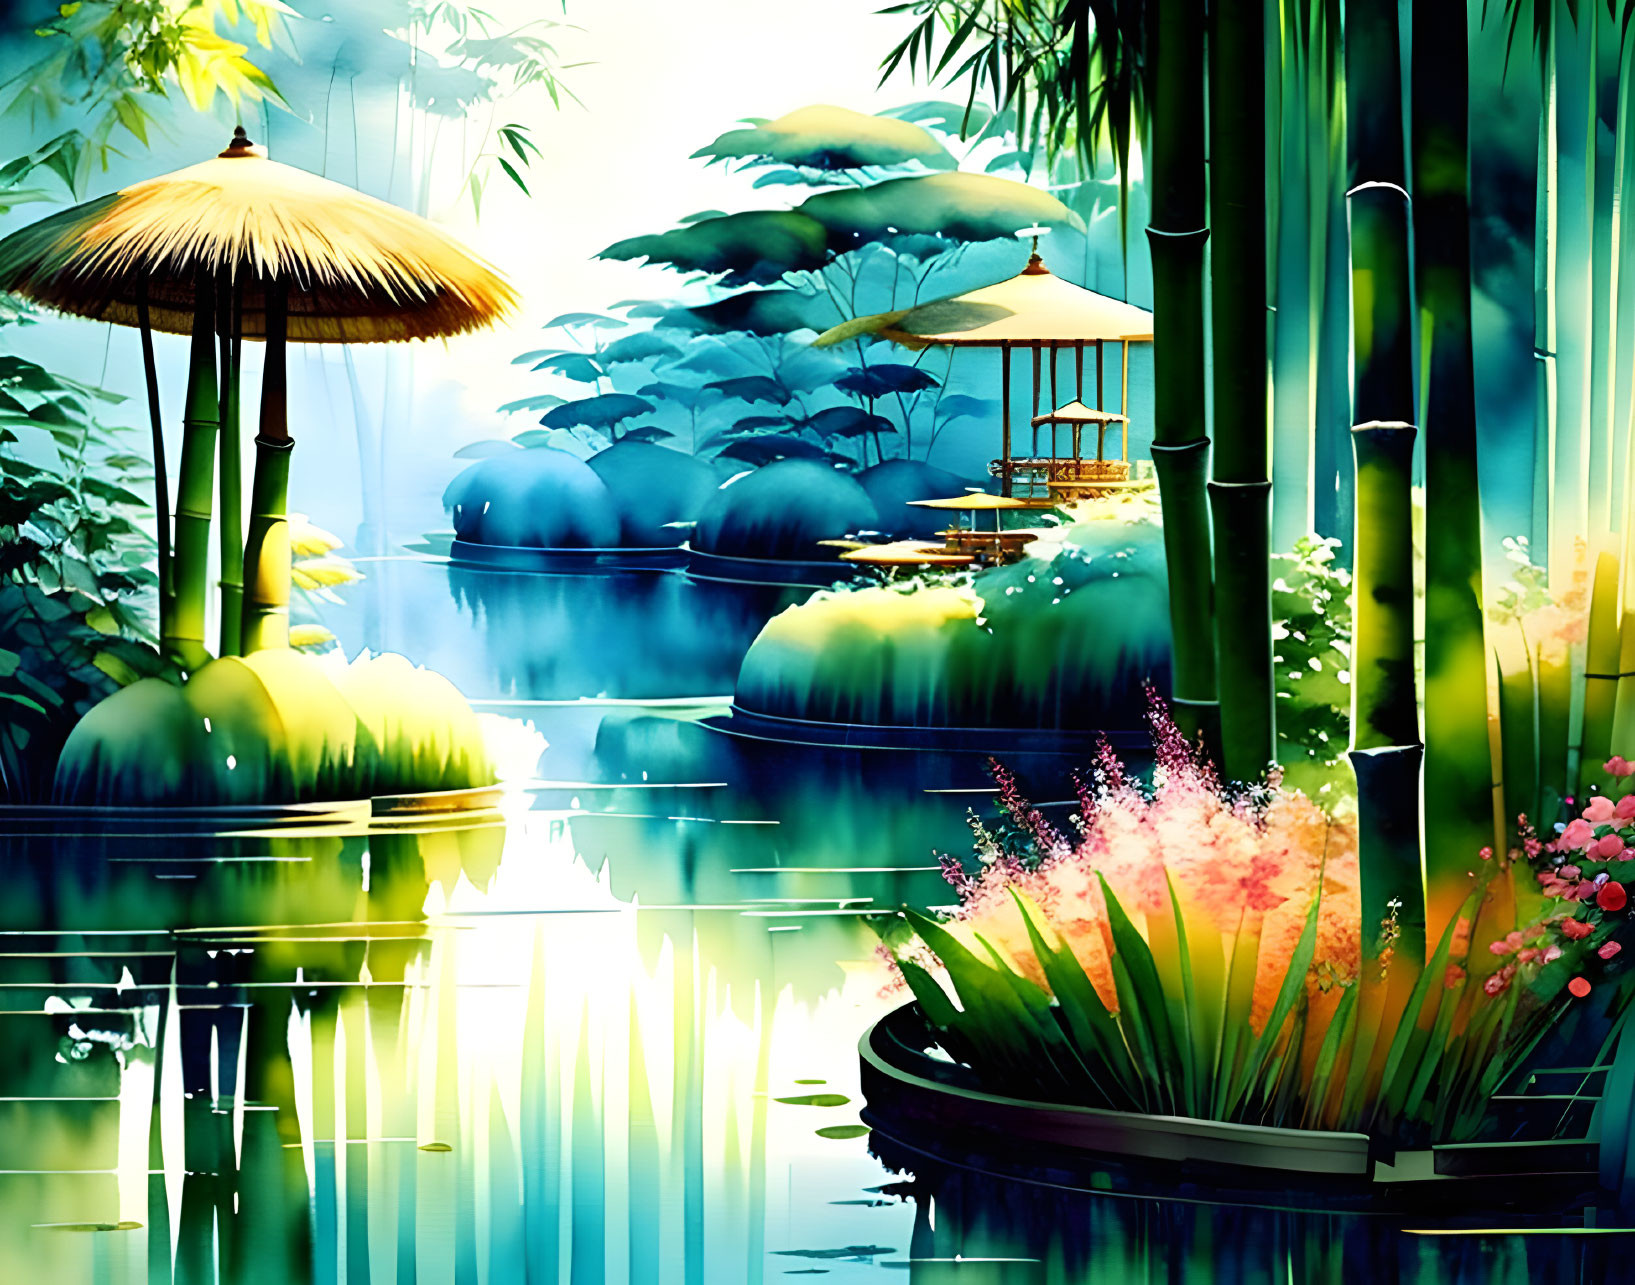 Digital Art: Peaceful Garden with Bamboo, Pond, and Traditional Structures